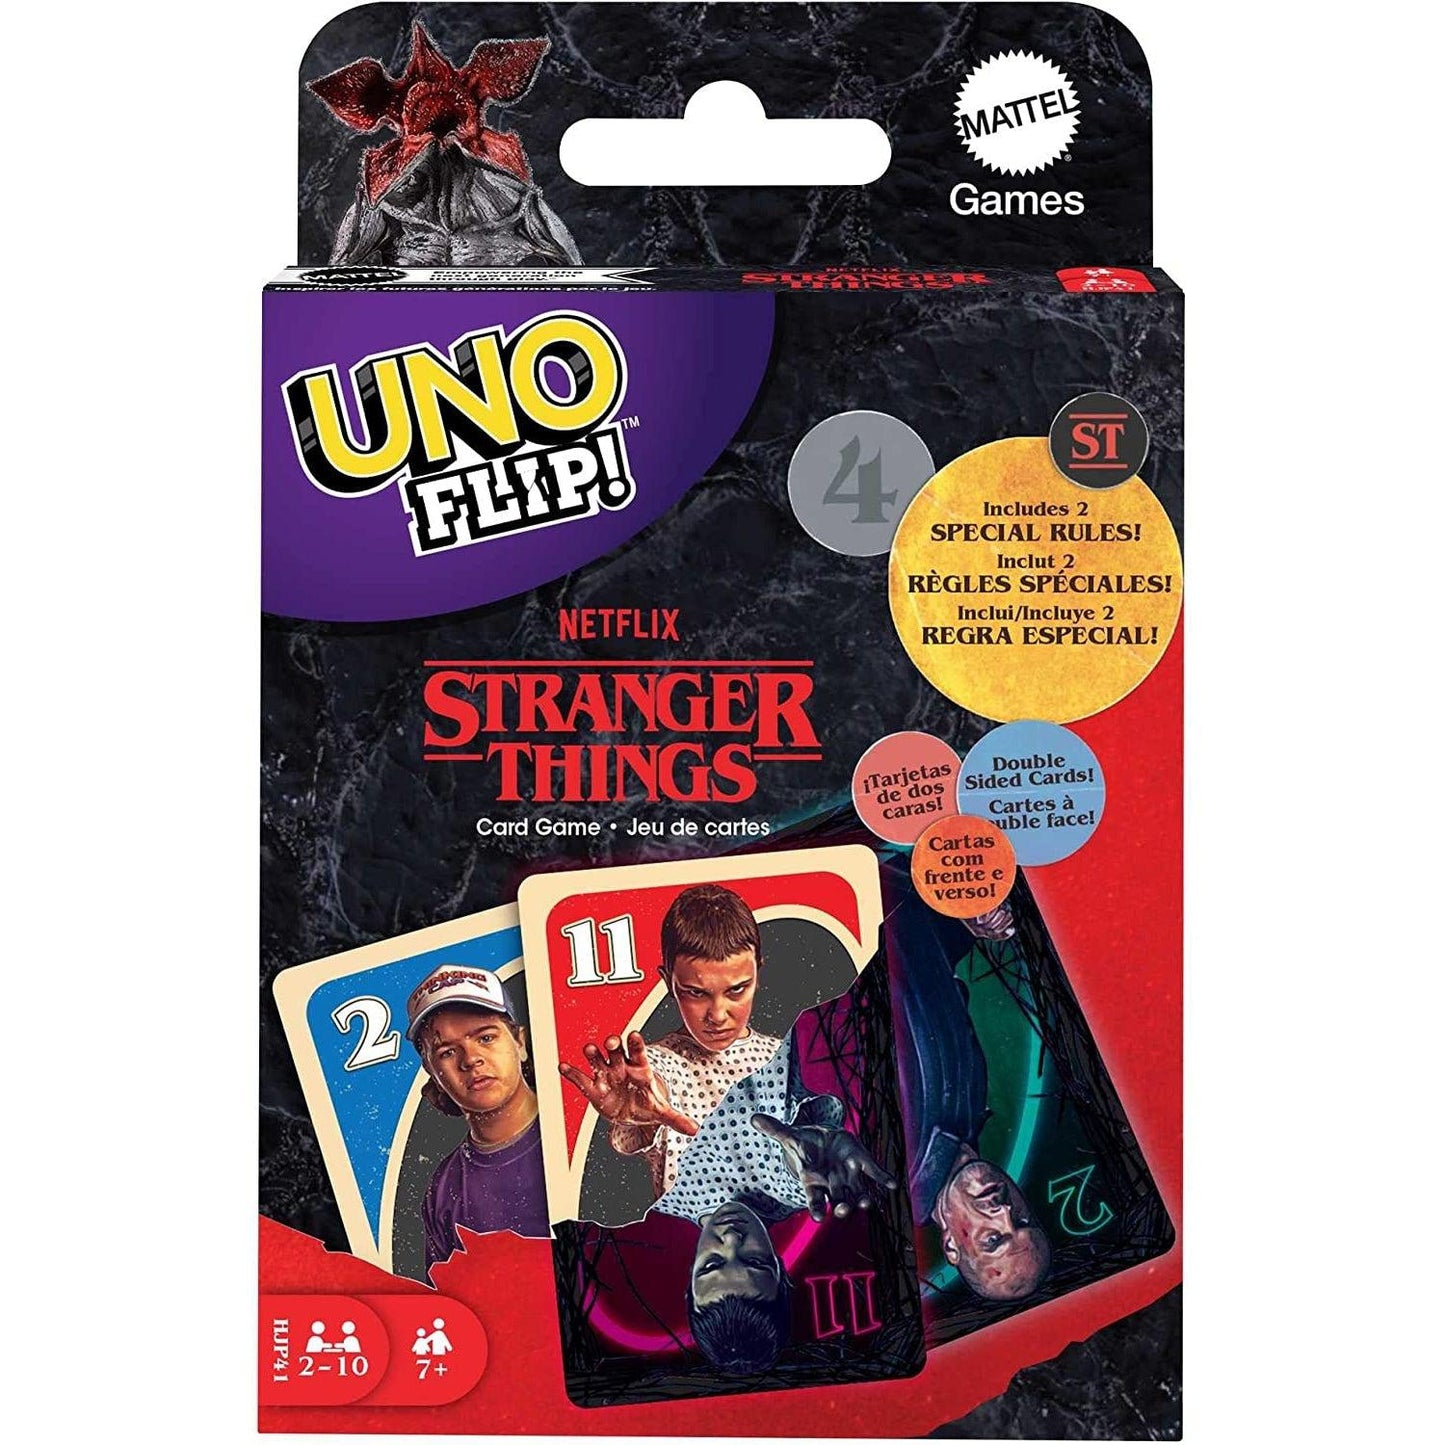 UNO FLIP! Stranger Things Card Game with Double-Sided Deck, Collectible Gift for Kid, Family & Adult Game Nights, 2 to 10 Players Ages 7 Years Old & Up - 2P Gaming